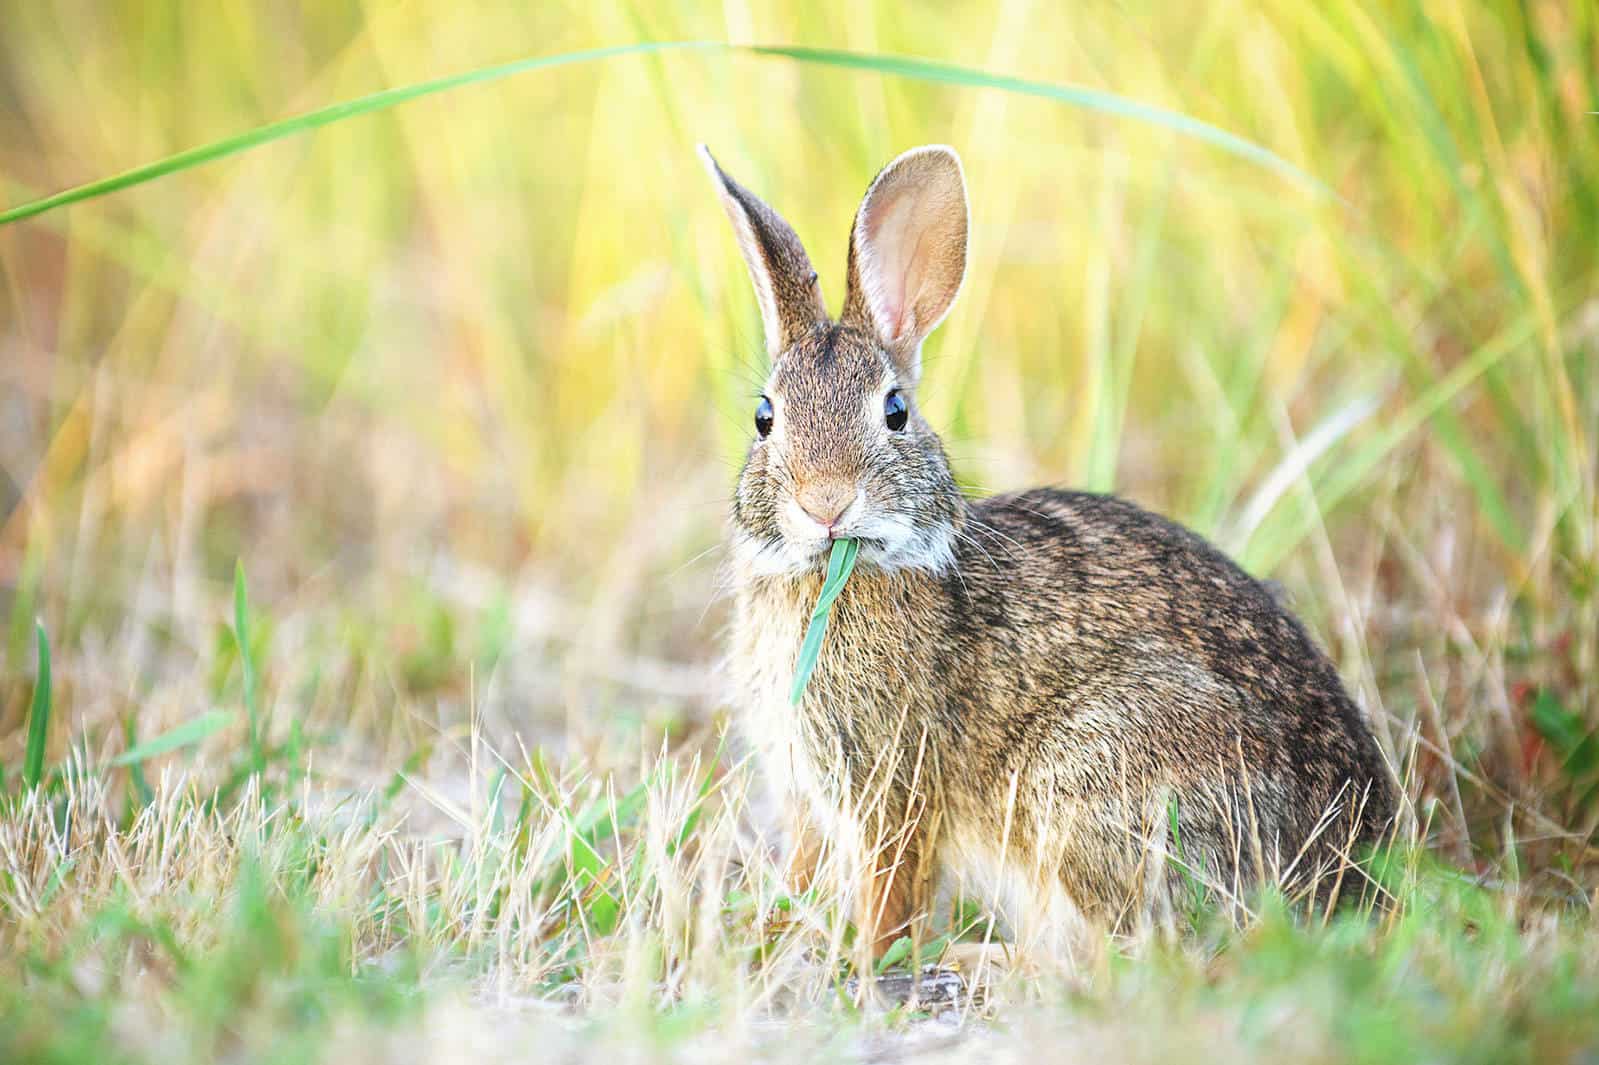 Foods that Wild Rabbits Love to Eat